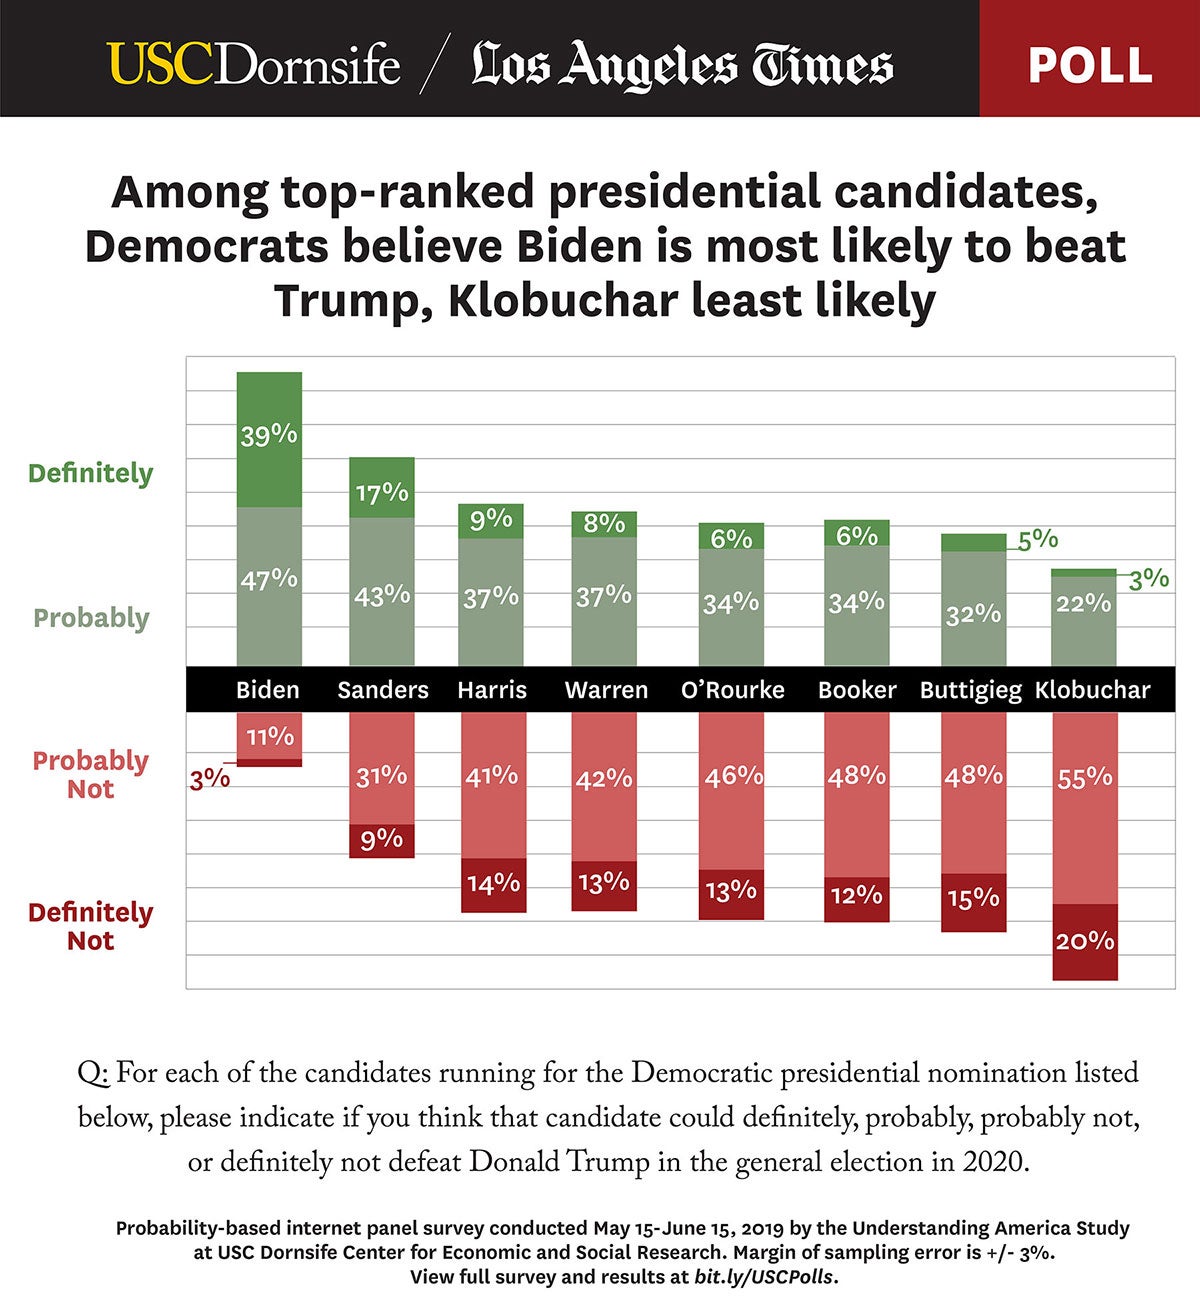 Graphic: Democrats think Biden most likely to beat Trump